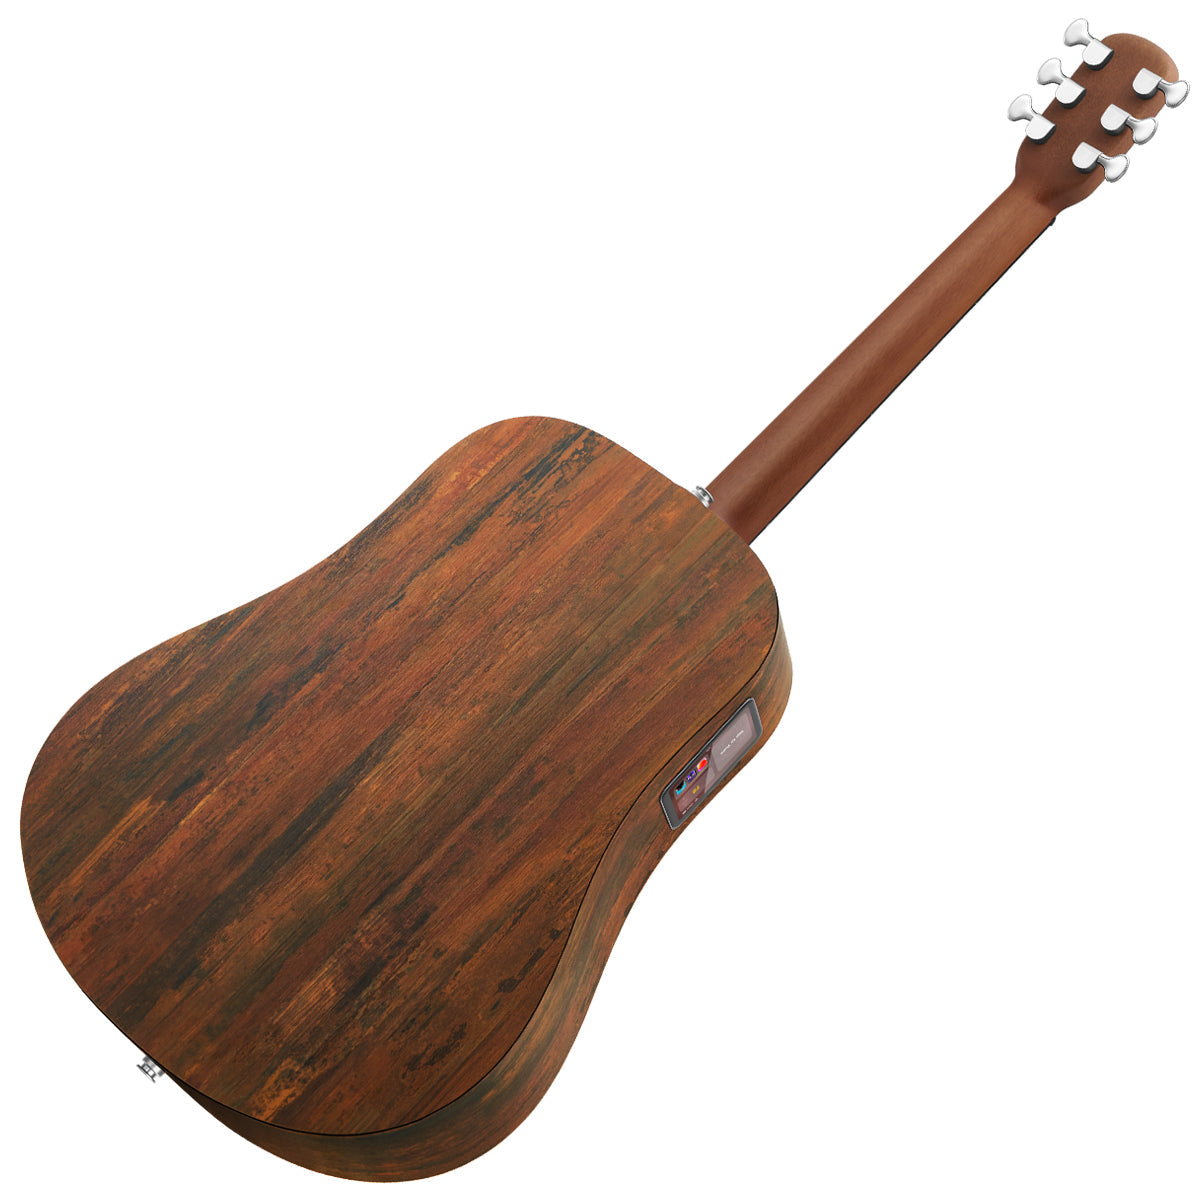 LAVA ME 4 SPRUCE 41" with AirFlow Bag ~ Woodgrain Brown/Burleywood, Acoustic Guitar for sale at Richards Guitars.